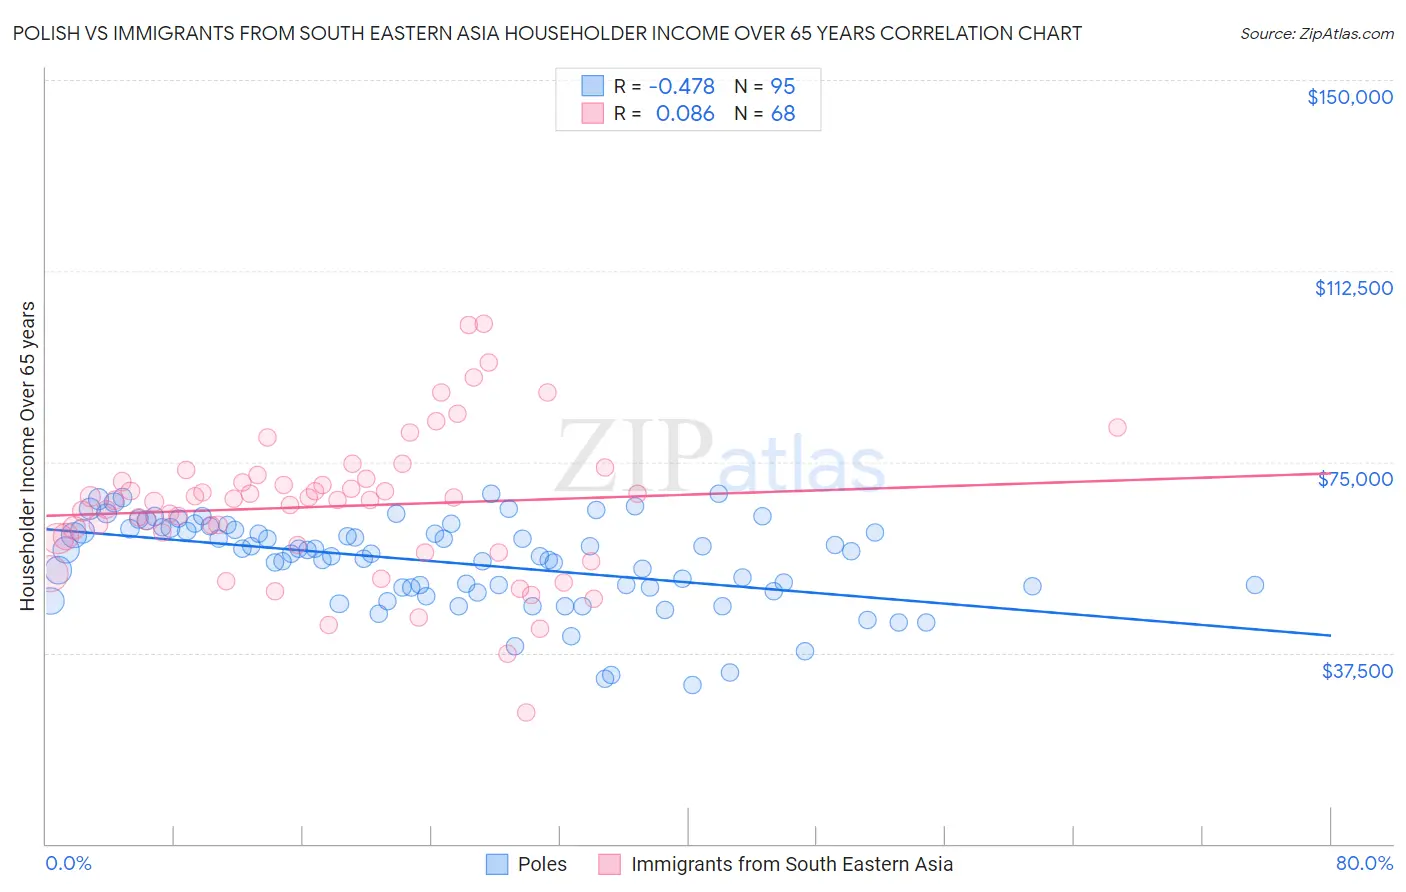 Polish vs Immigrants from South Eastern Asia Householder Income Over 65 years